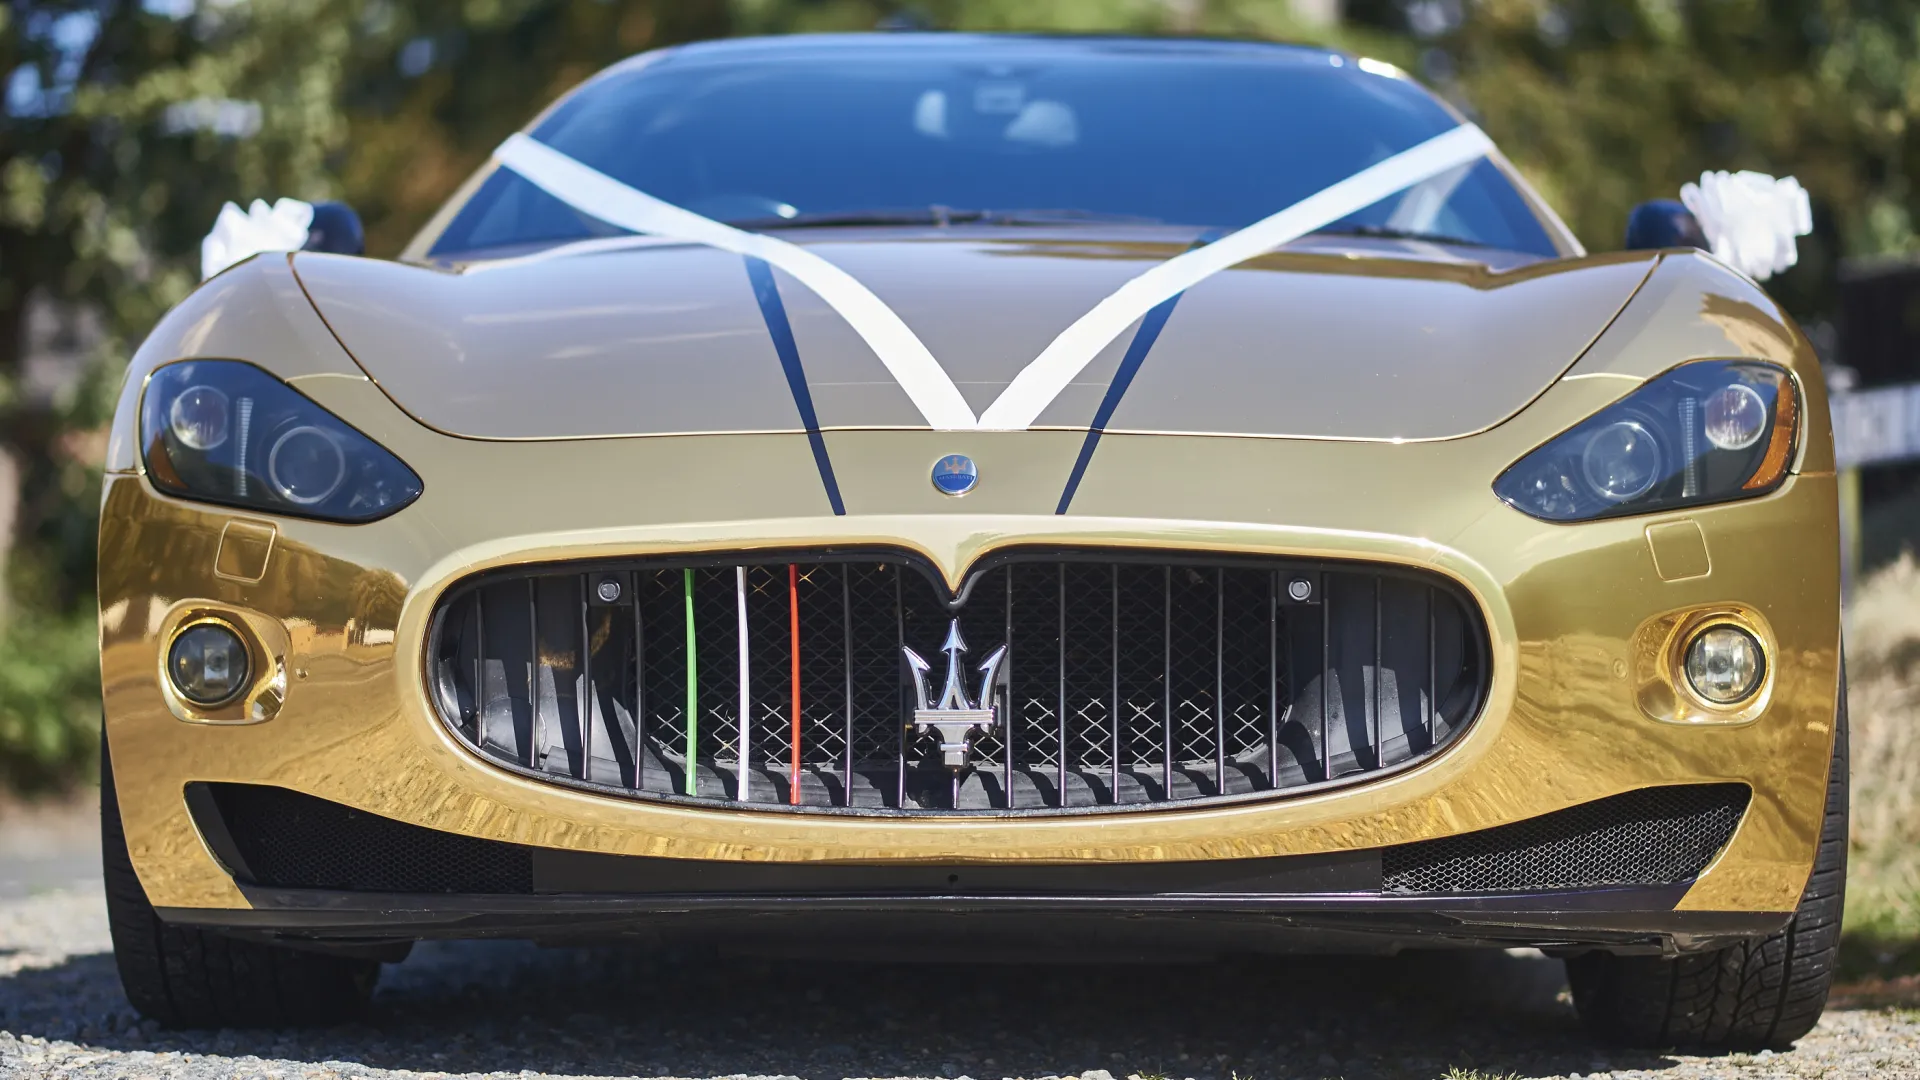 Full Front view of Maserati GranTurismo decorated with White ribbons and Trident logo in the middle of the grill